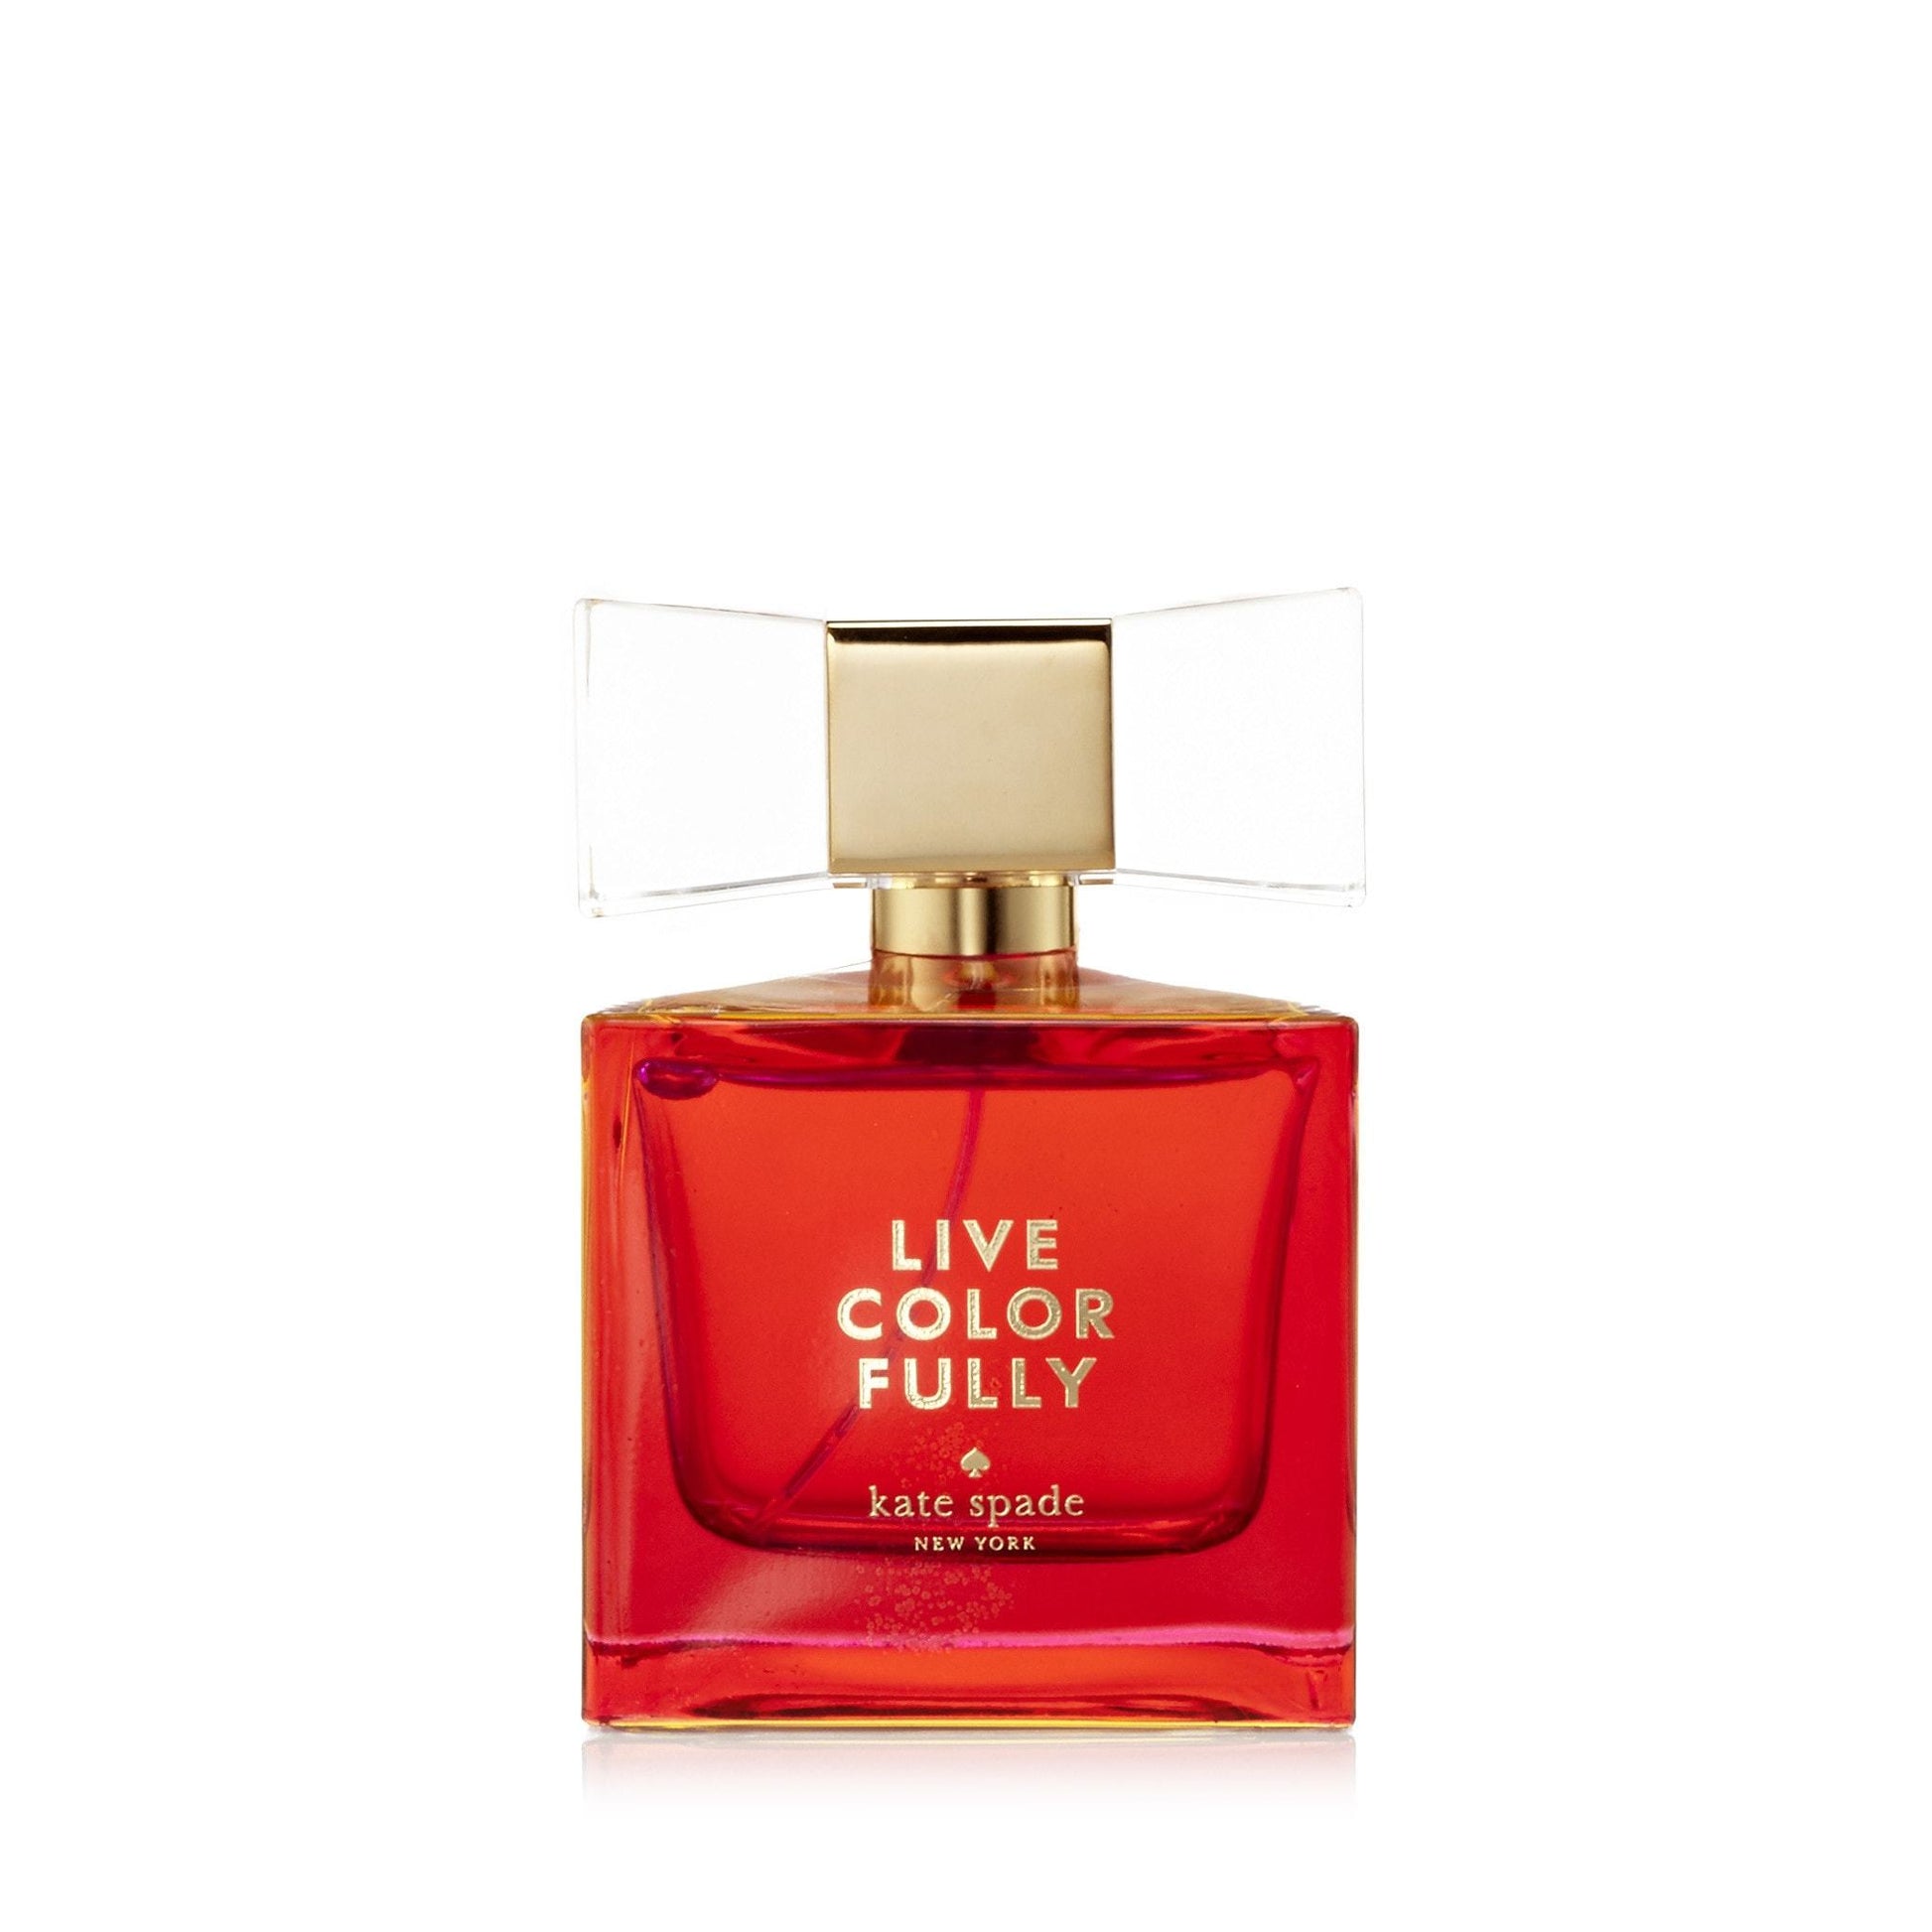 N.Y. Live Colorfully Eau de Parfum Spray for Women by Kate Spade, Product image 2